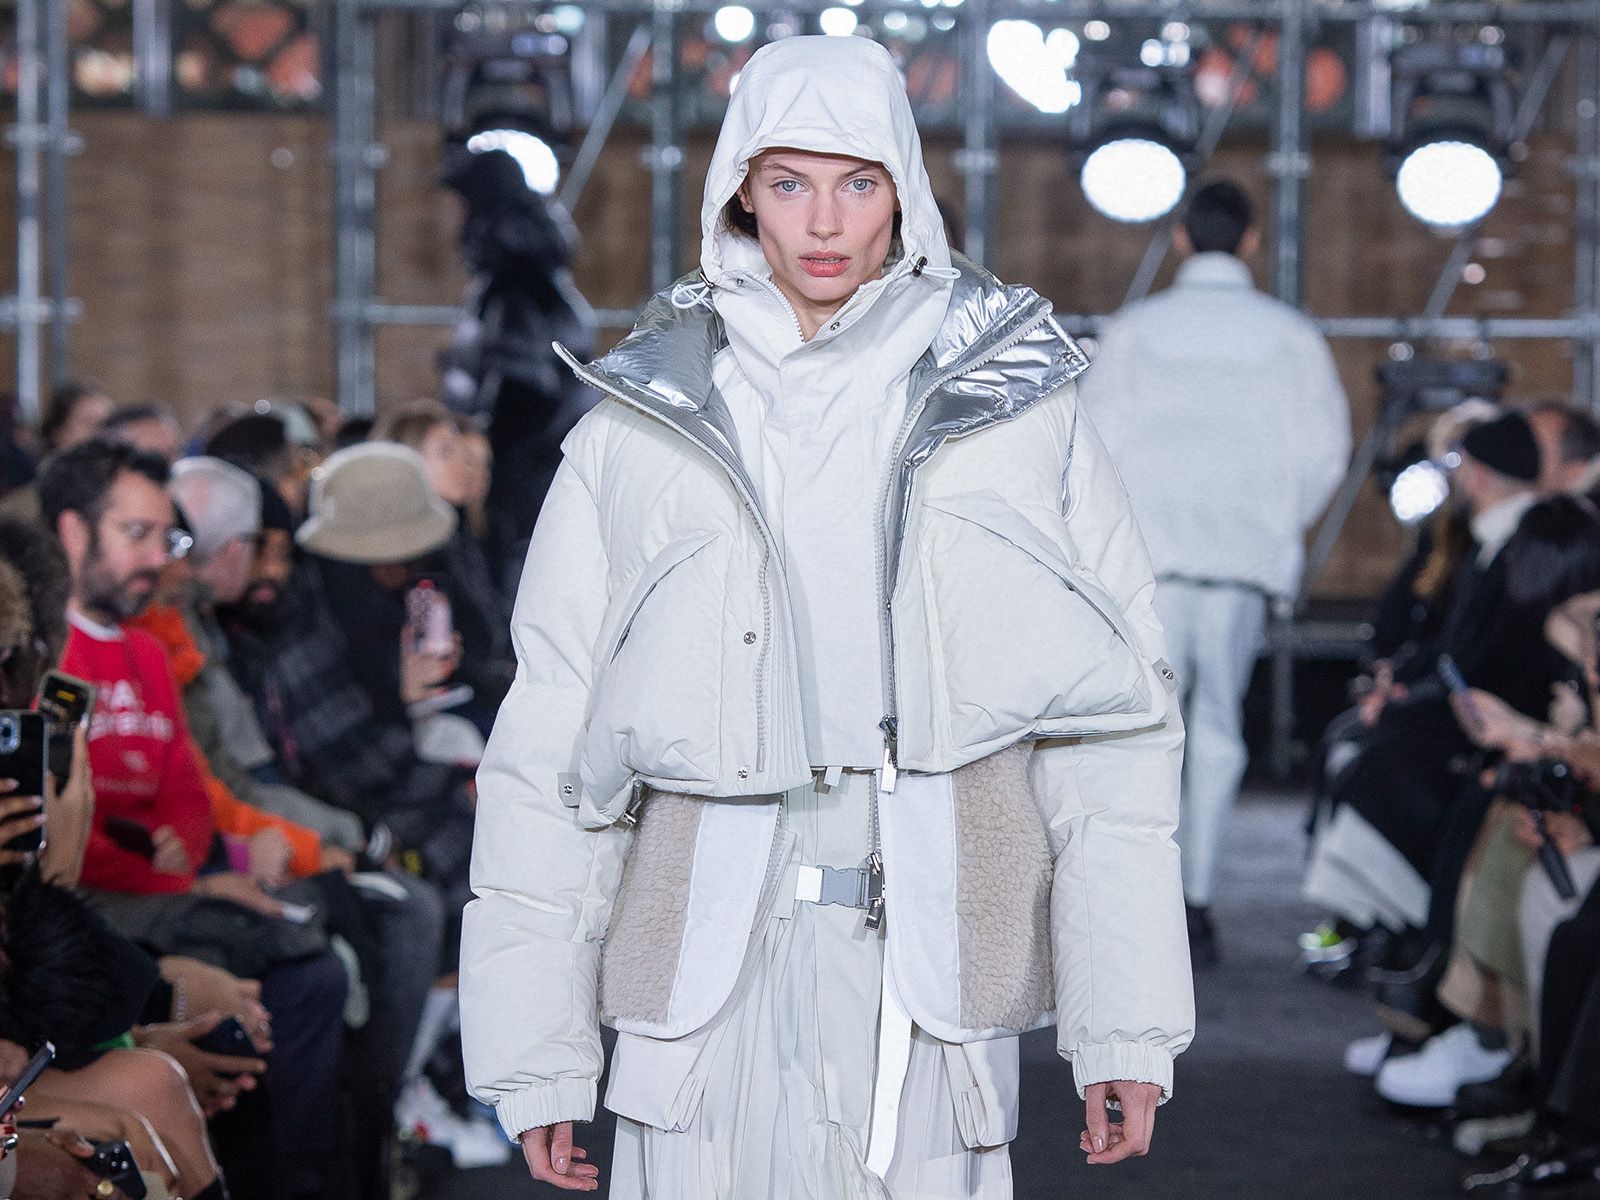 Sacai unveils three major collaborations: Moncler, Carhartt WIP and Nike